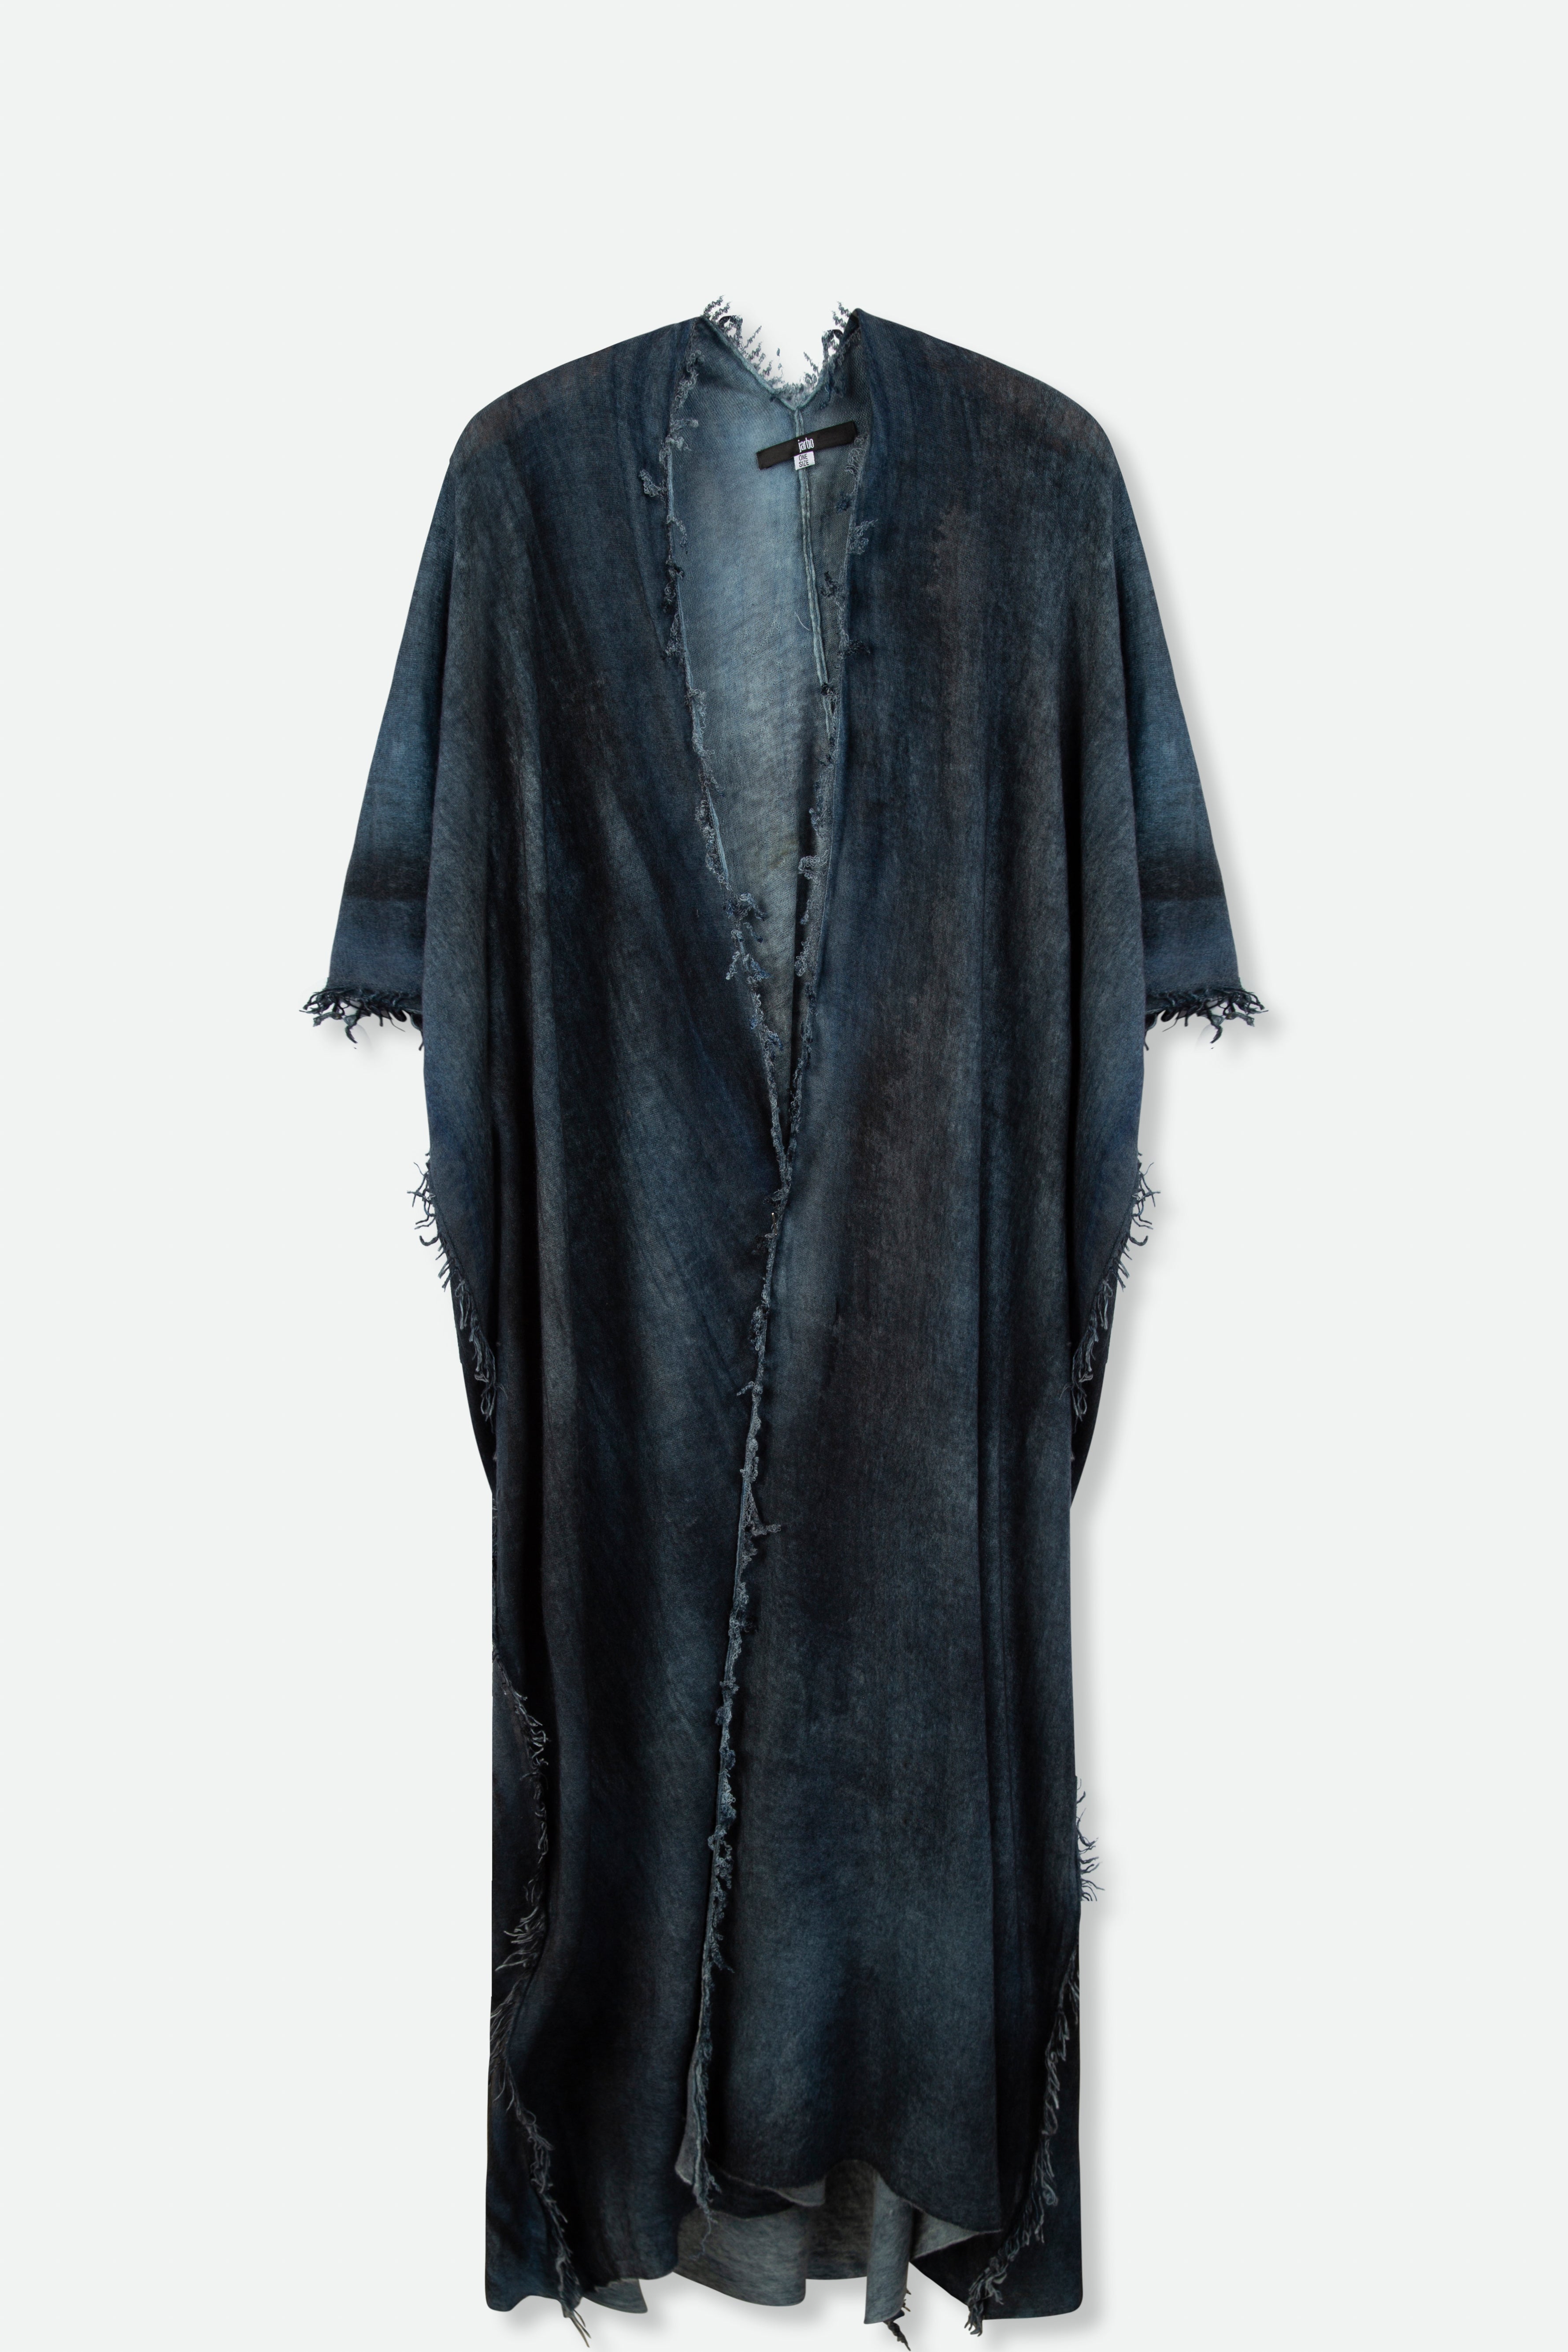 PATNA CARDIGAN IN HAND-DYED CASHMERE MIDNIGHT BLUE